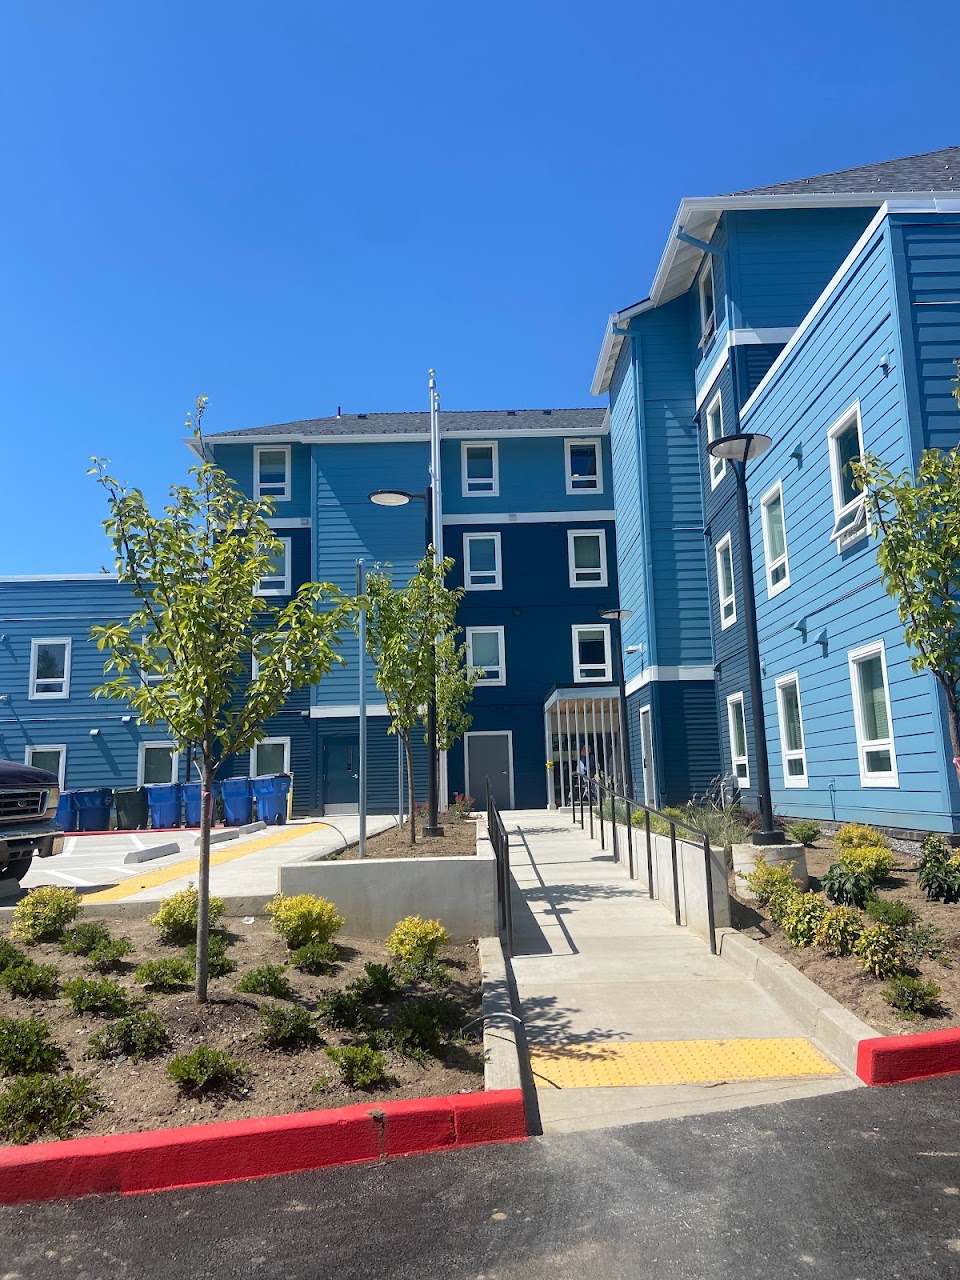 Photo of CENTRAL PARK PLACE. Affordable housing located at 1900 FORT VANCOUVER WAY VANCOUVER, WA 98663